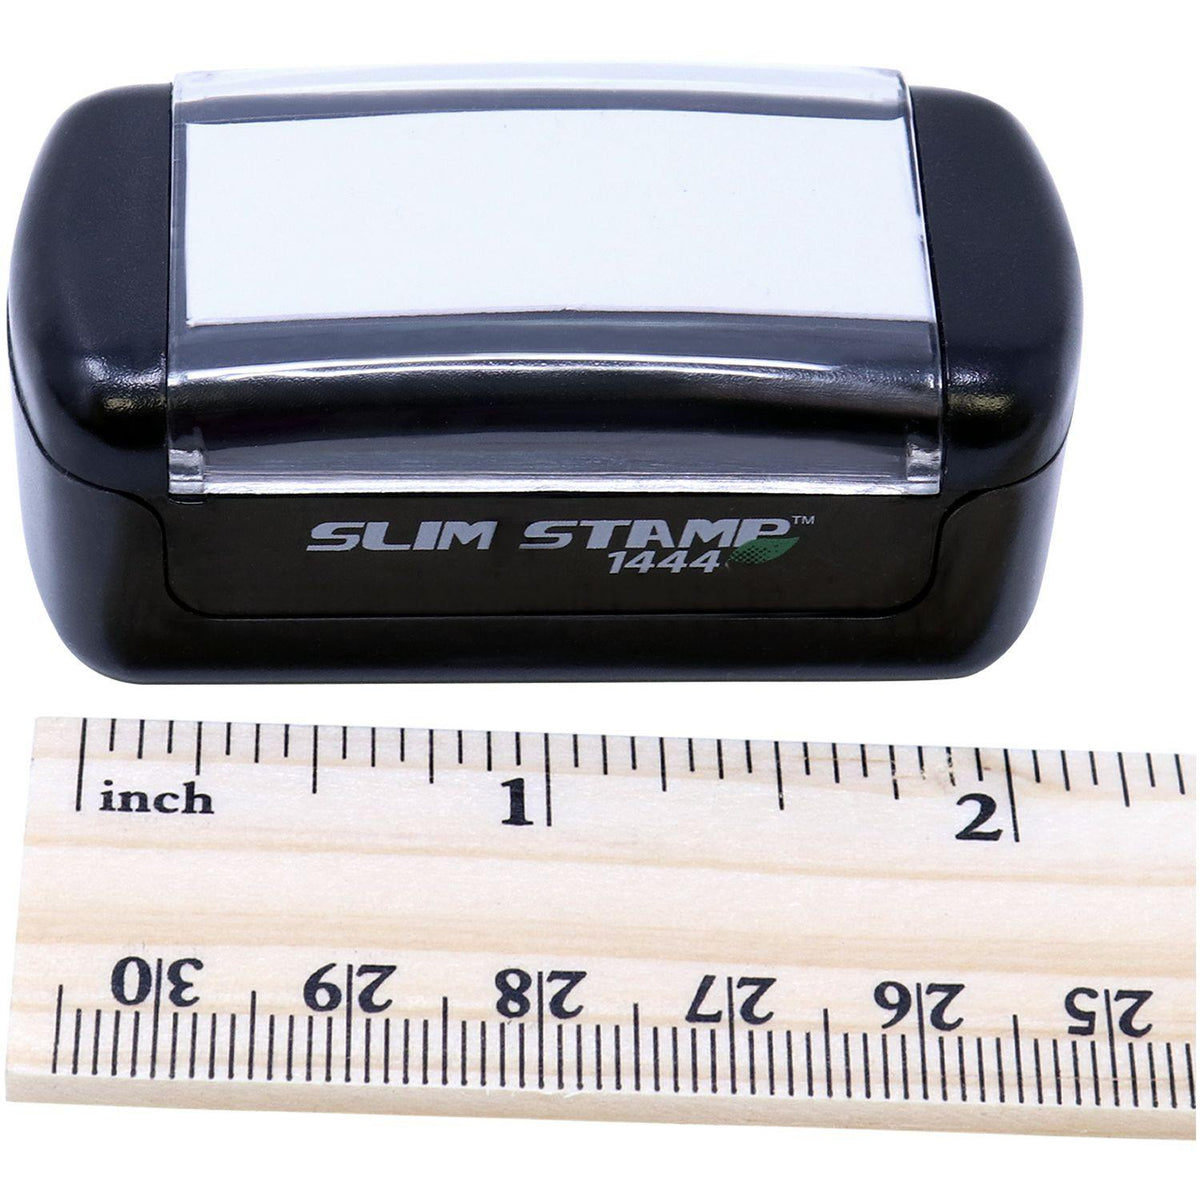 Measurement Slim Pre-Inked Economy Rate Stamp with Ruler